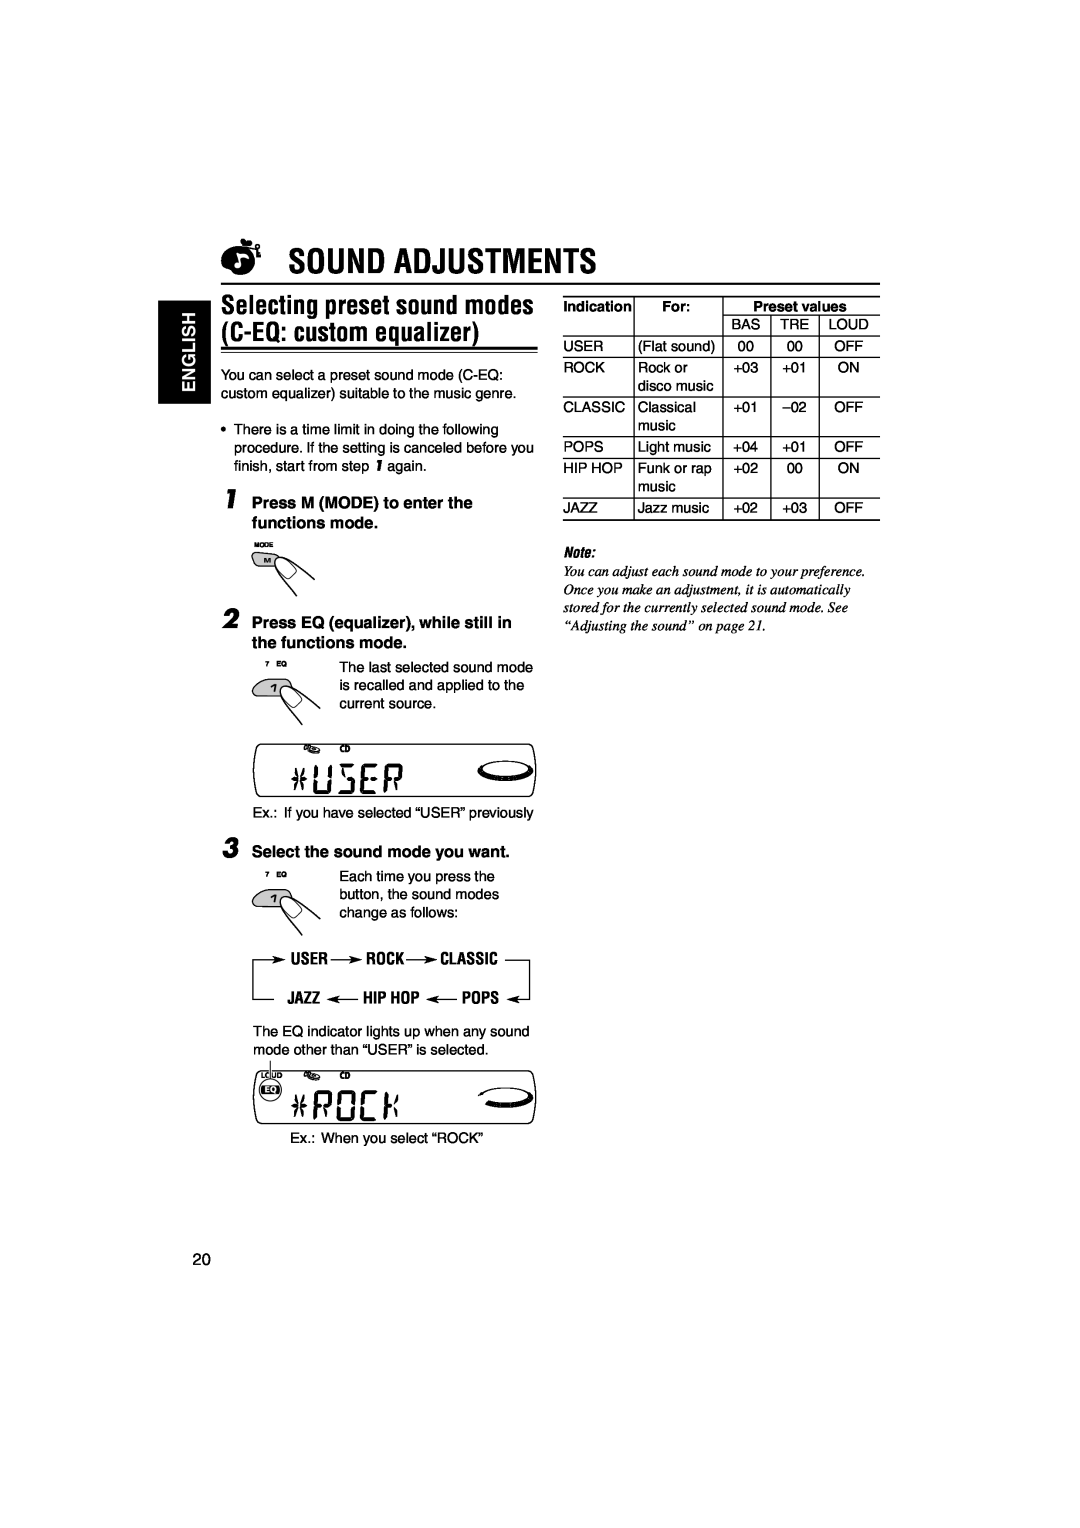 JVC KD-SC800R manual Sound Adjustments, English, Press M MODE to enter the functions mode, Select the sound mode you want 